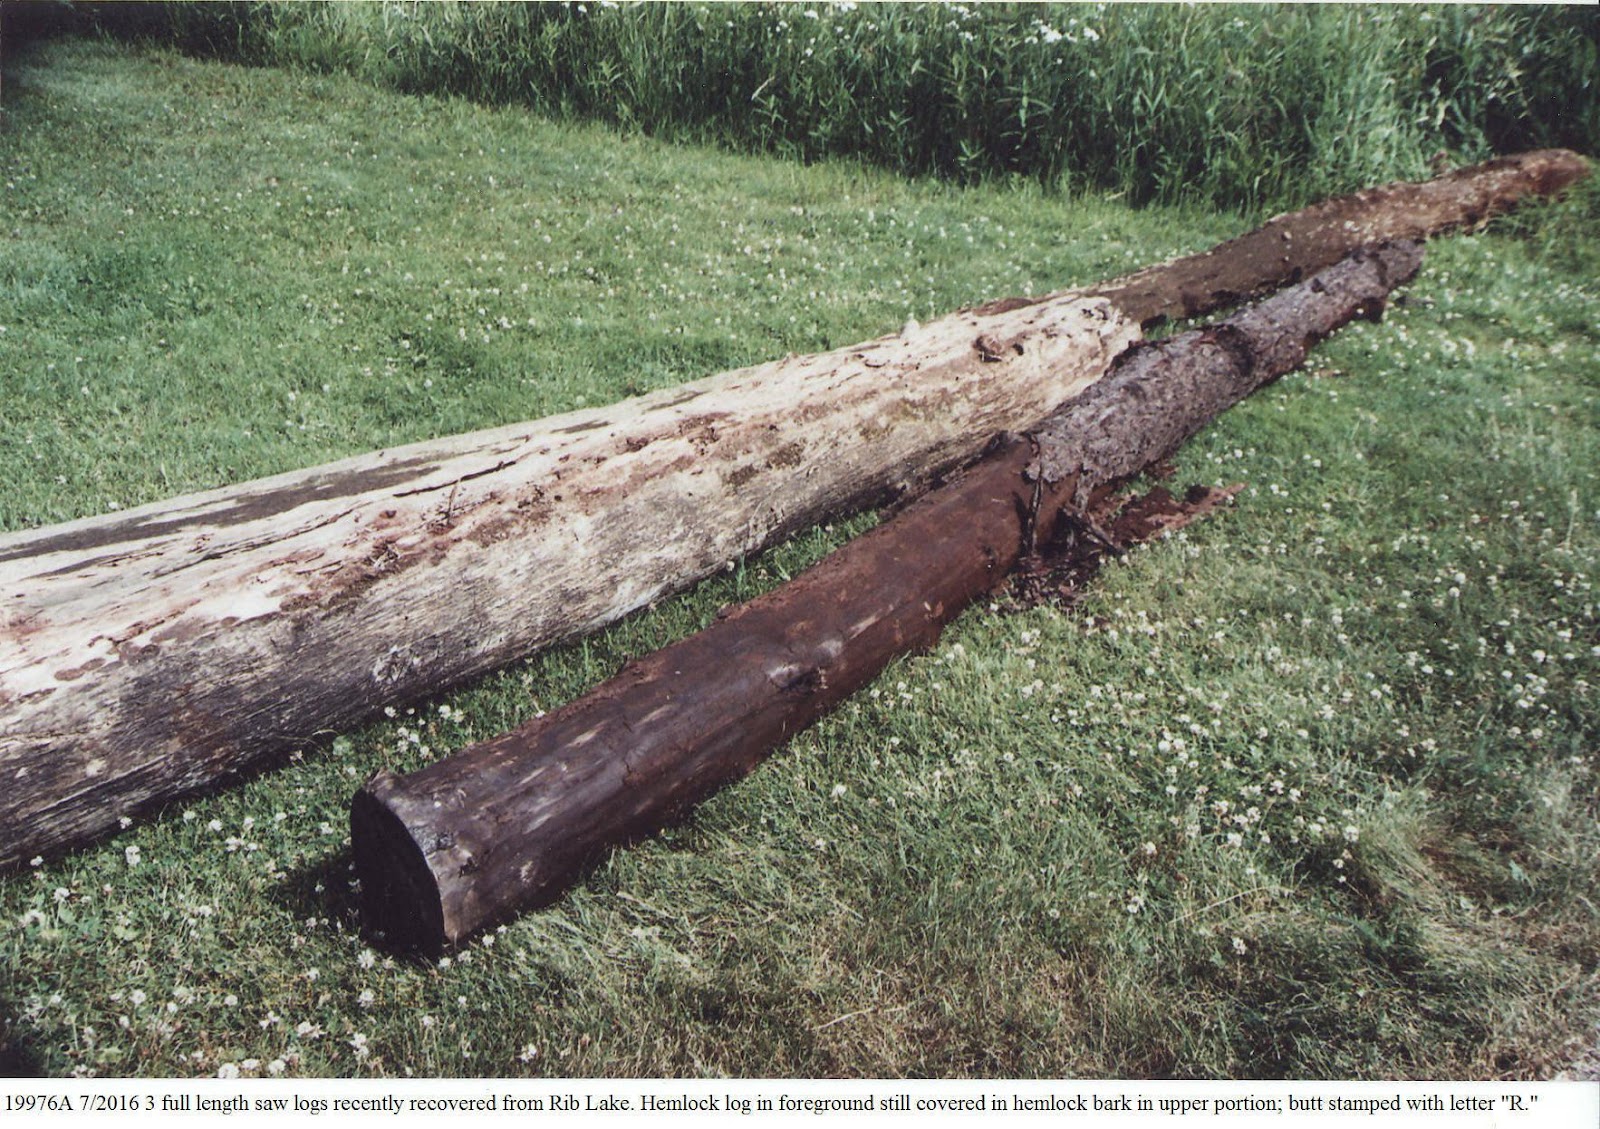 C:\Users\Robert P. Rusch\Desktop\II. RLHSoc\Documents & Photos-Scanned\Rib Lake History 19900-19999\19976A P. 7-2016 3 logs recovered from Rib Lake after at least 64 years..jpg